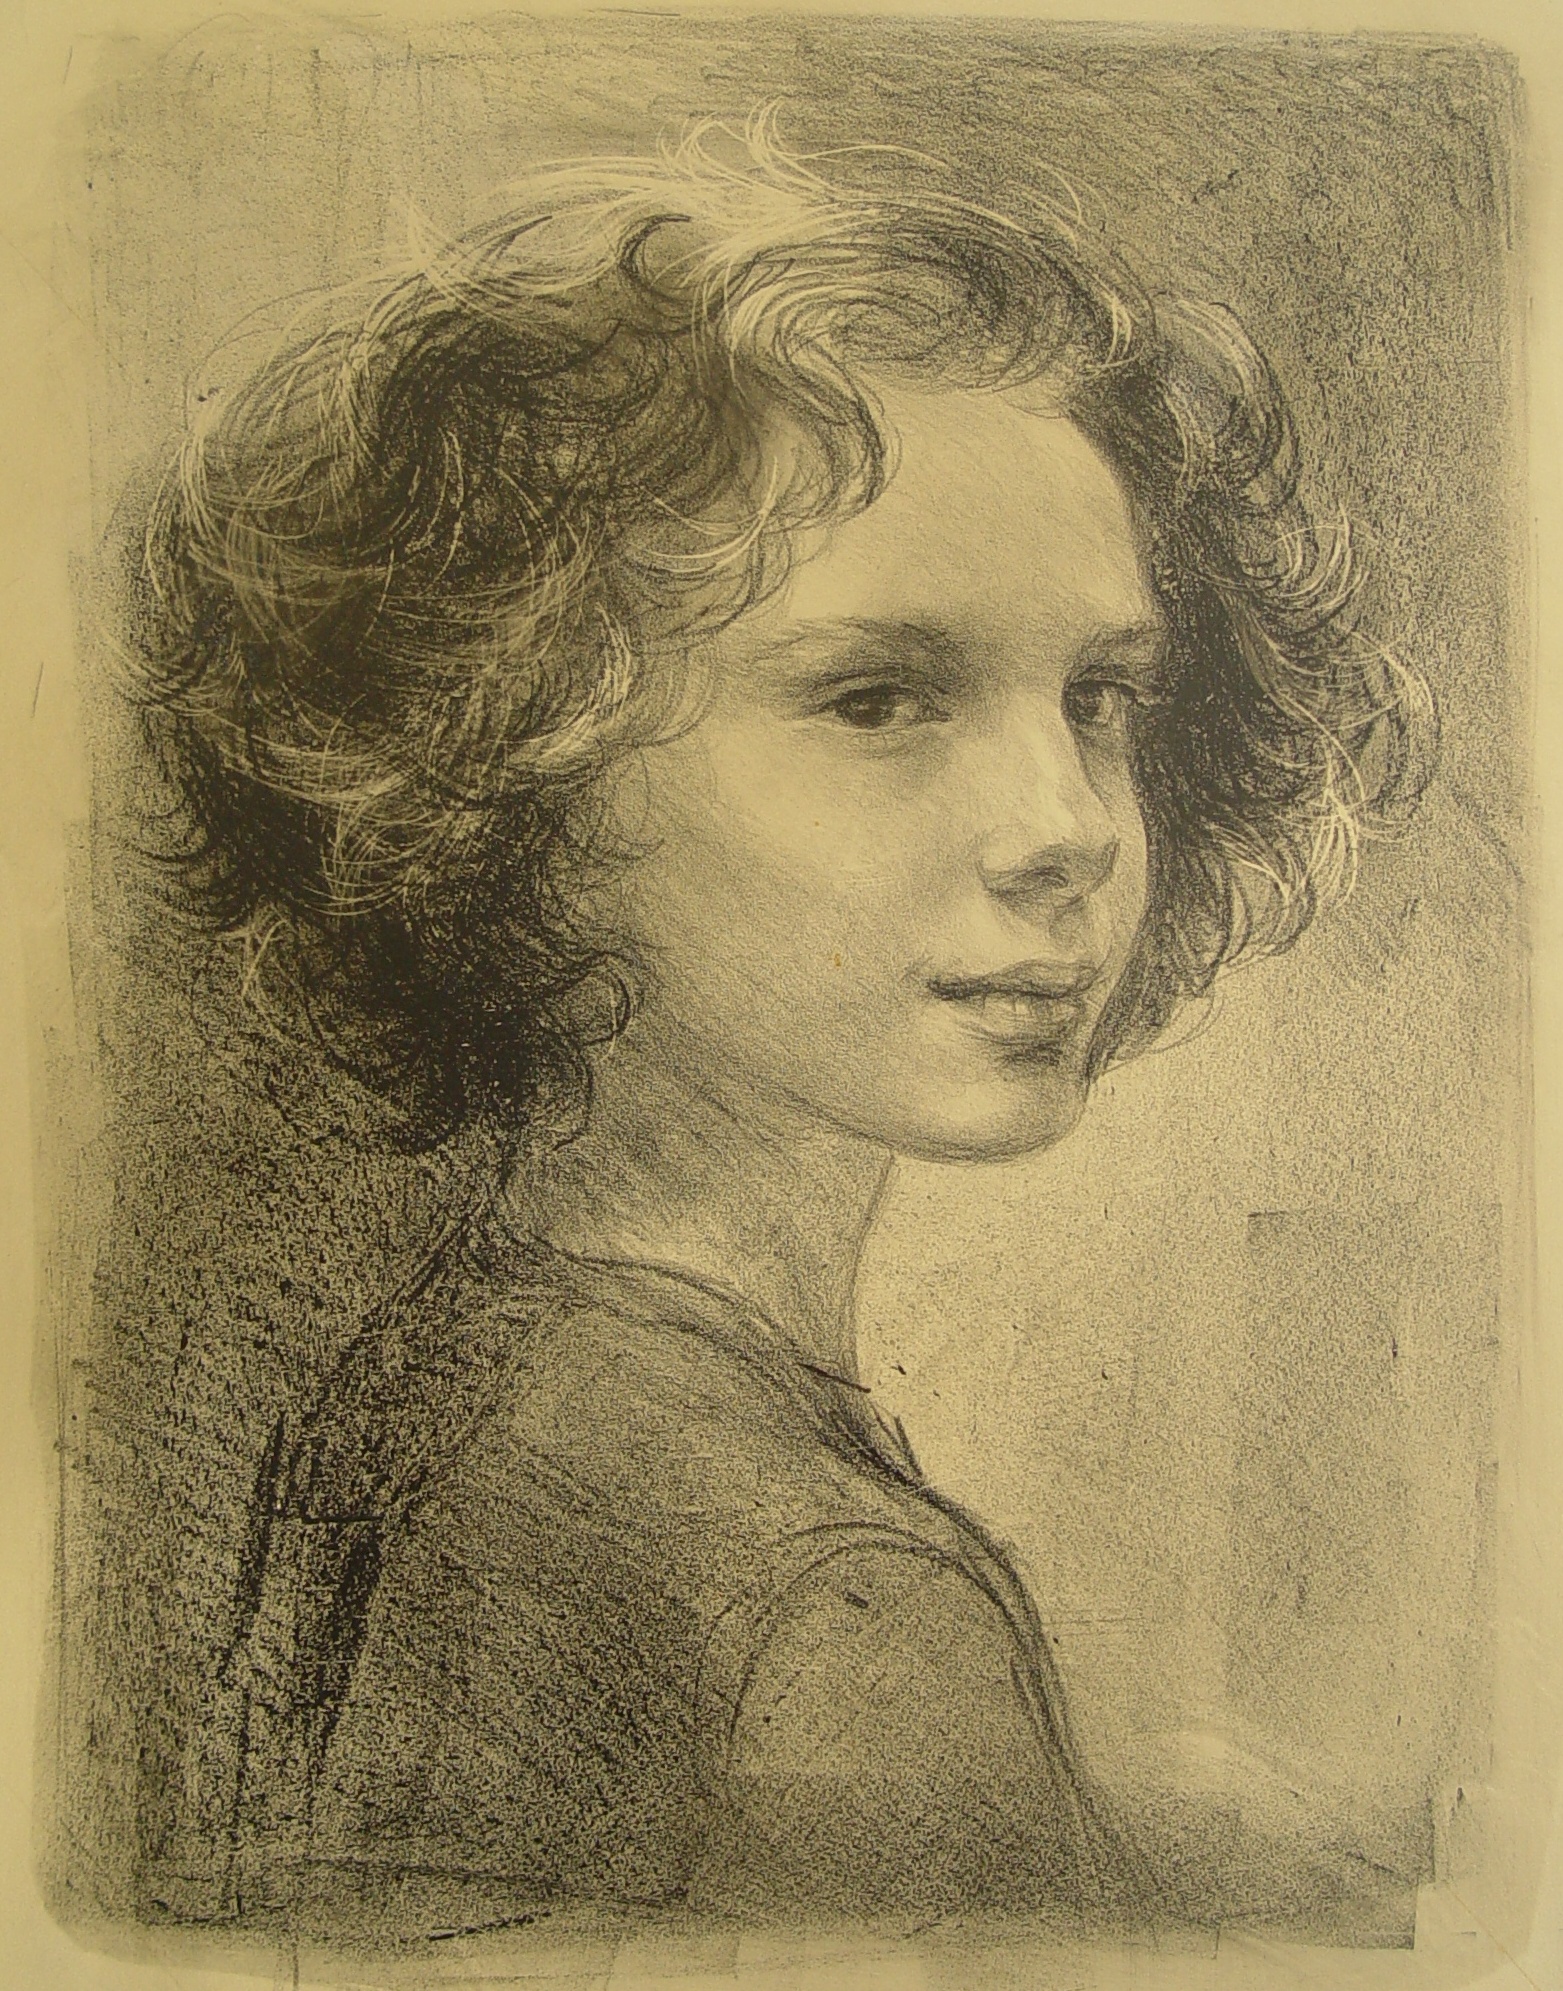 My Daughter, lithograph